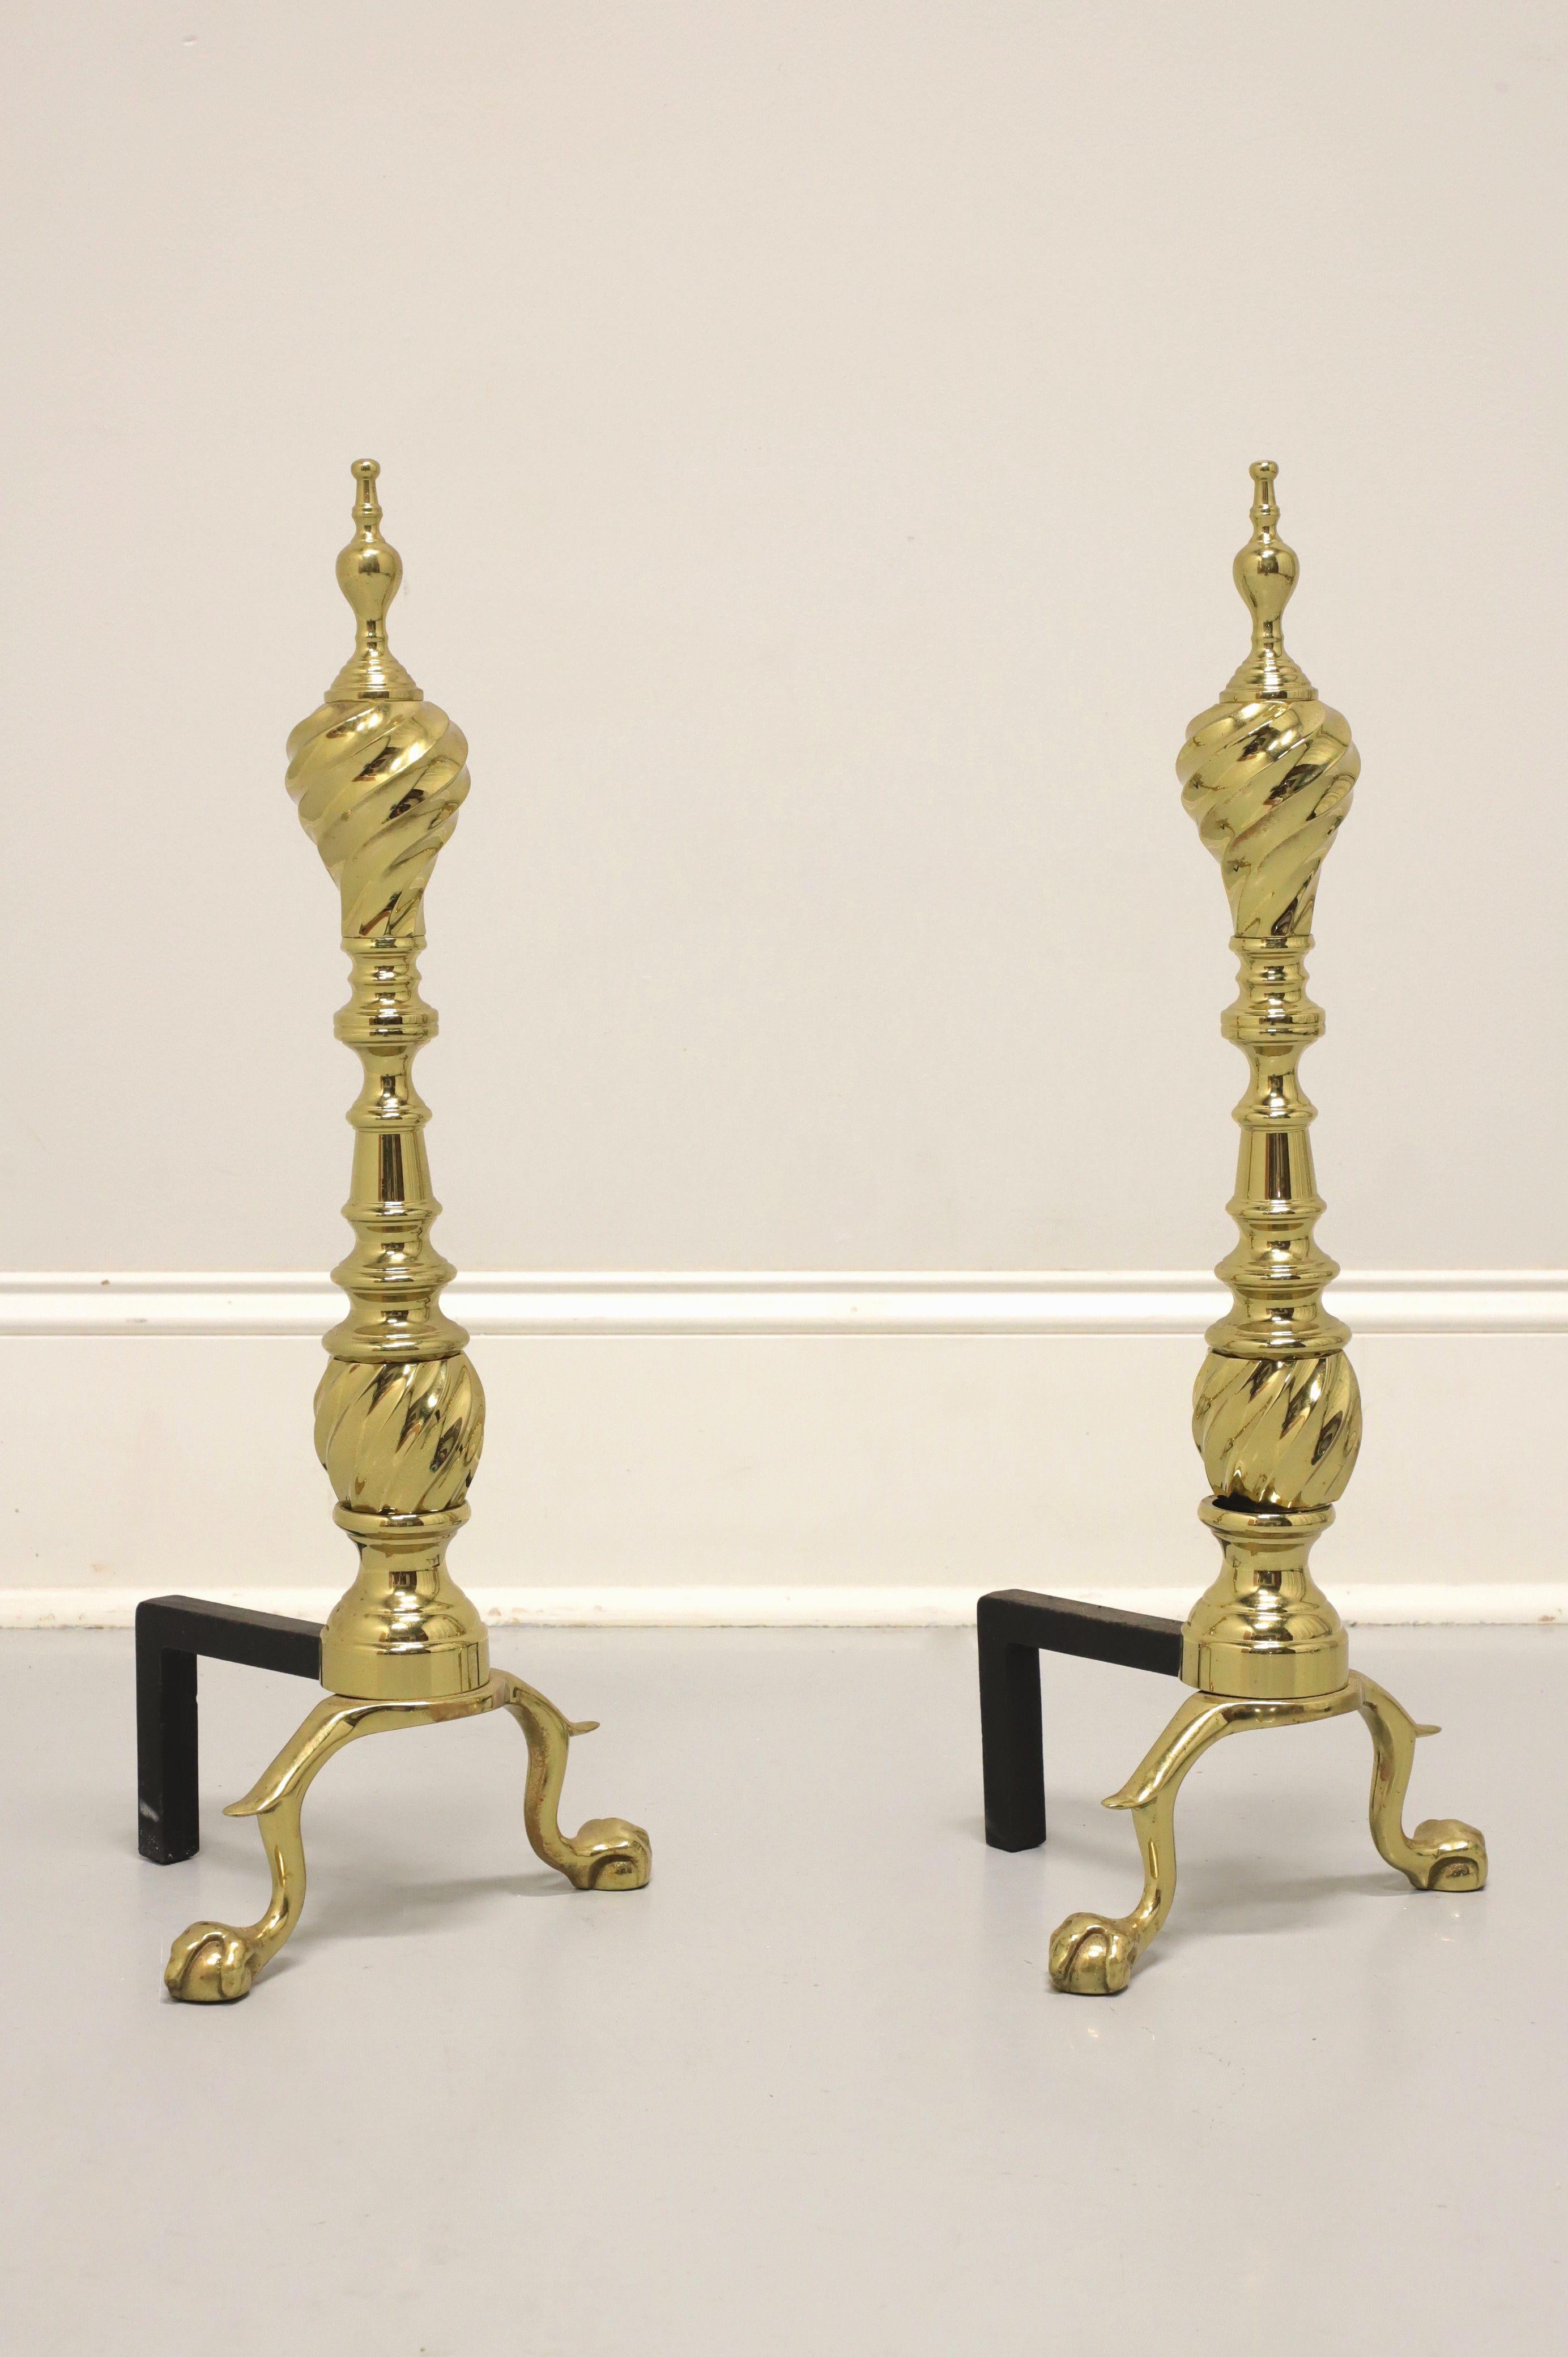 VIRGINIA METALCRAFTERS Middleton House Brass & Metal Fireplace Andirons, B For Sale 3